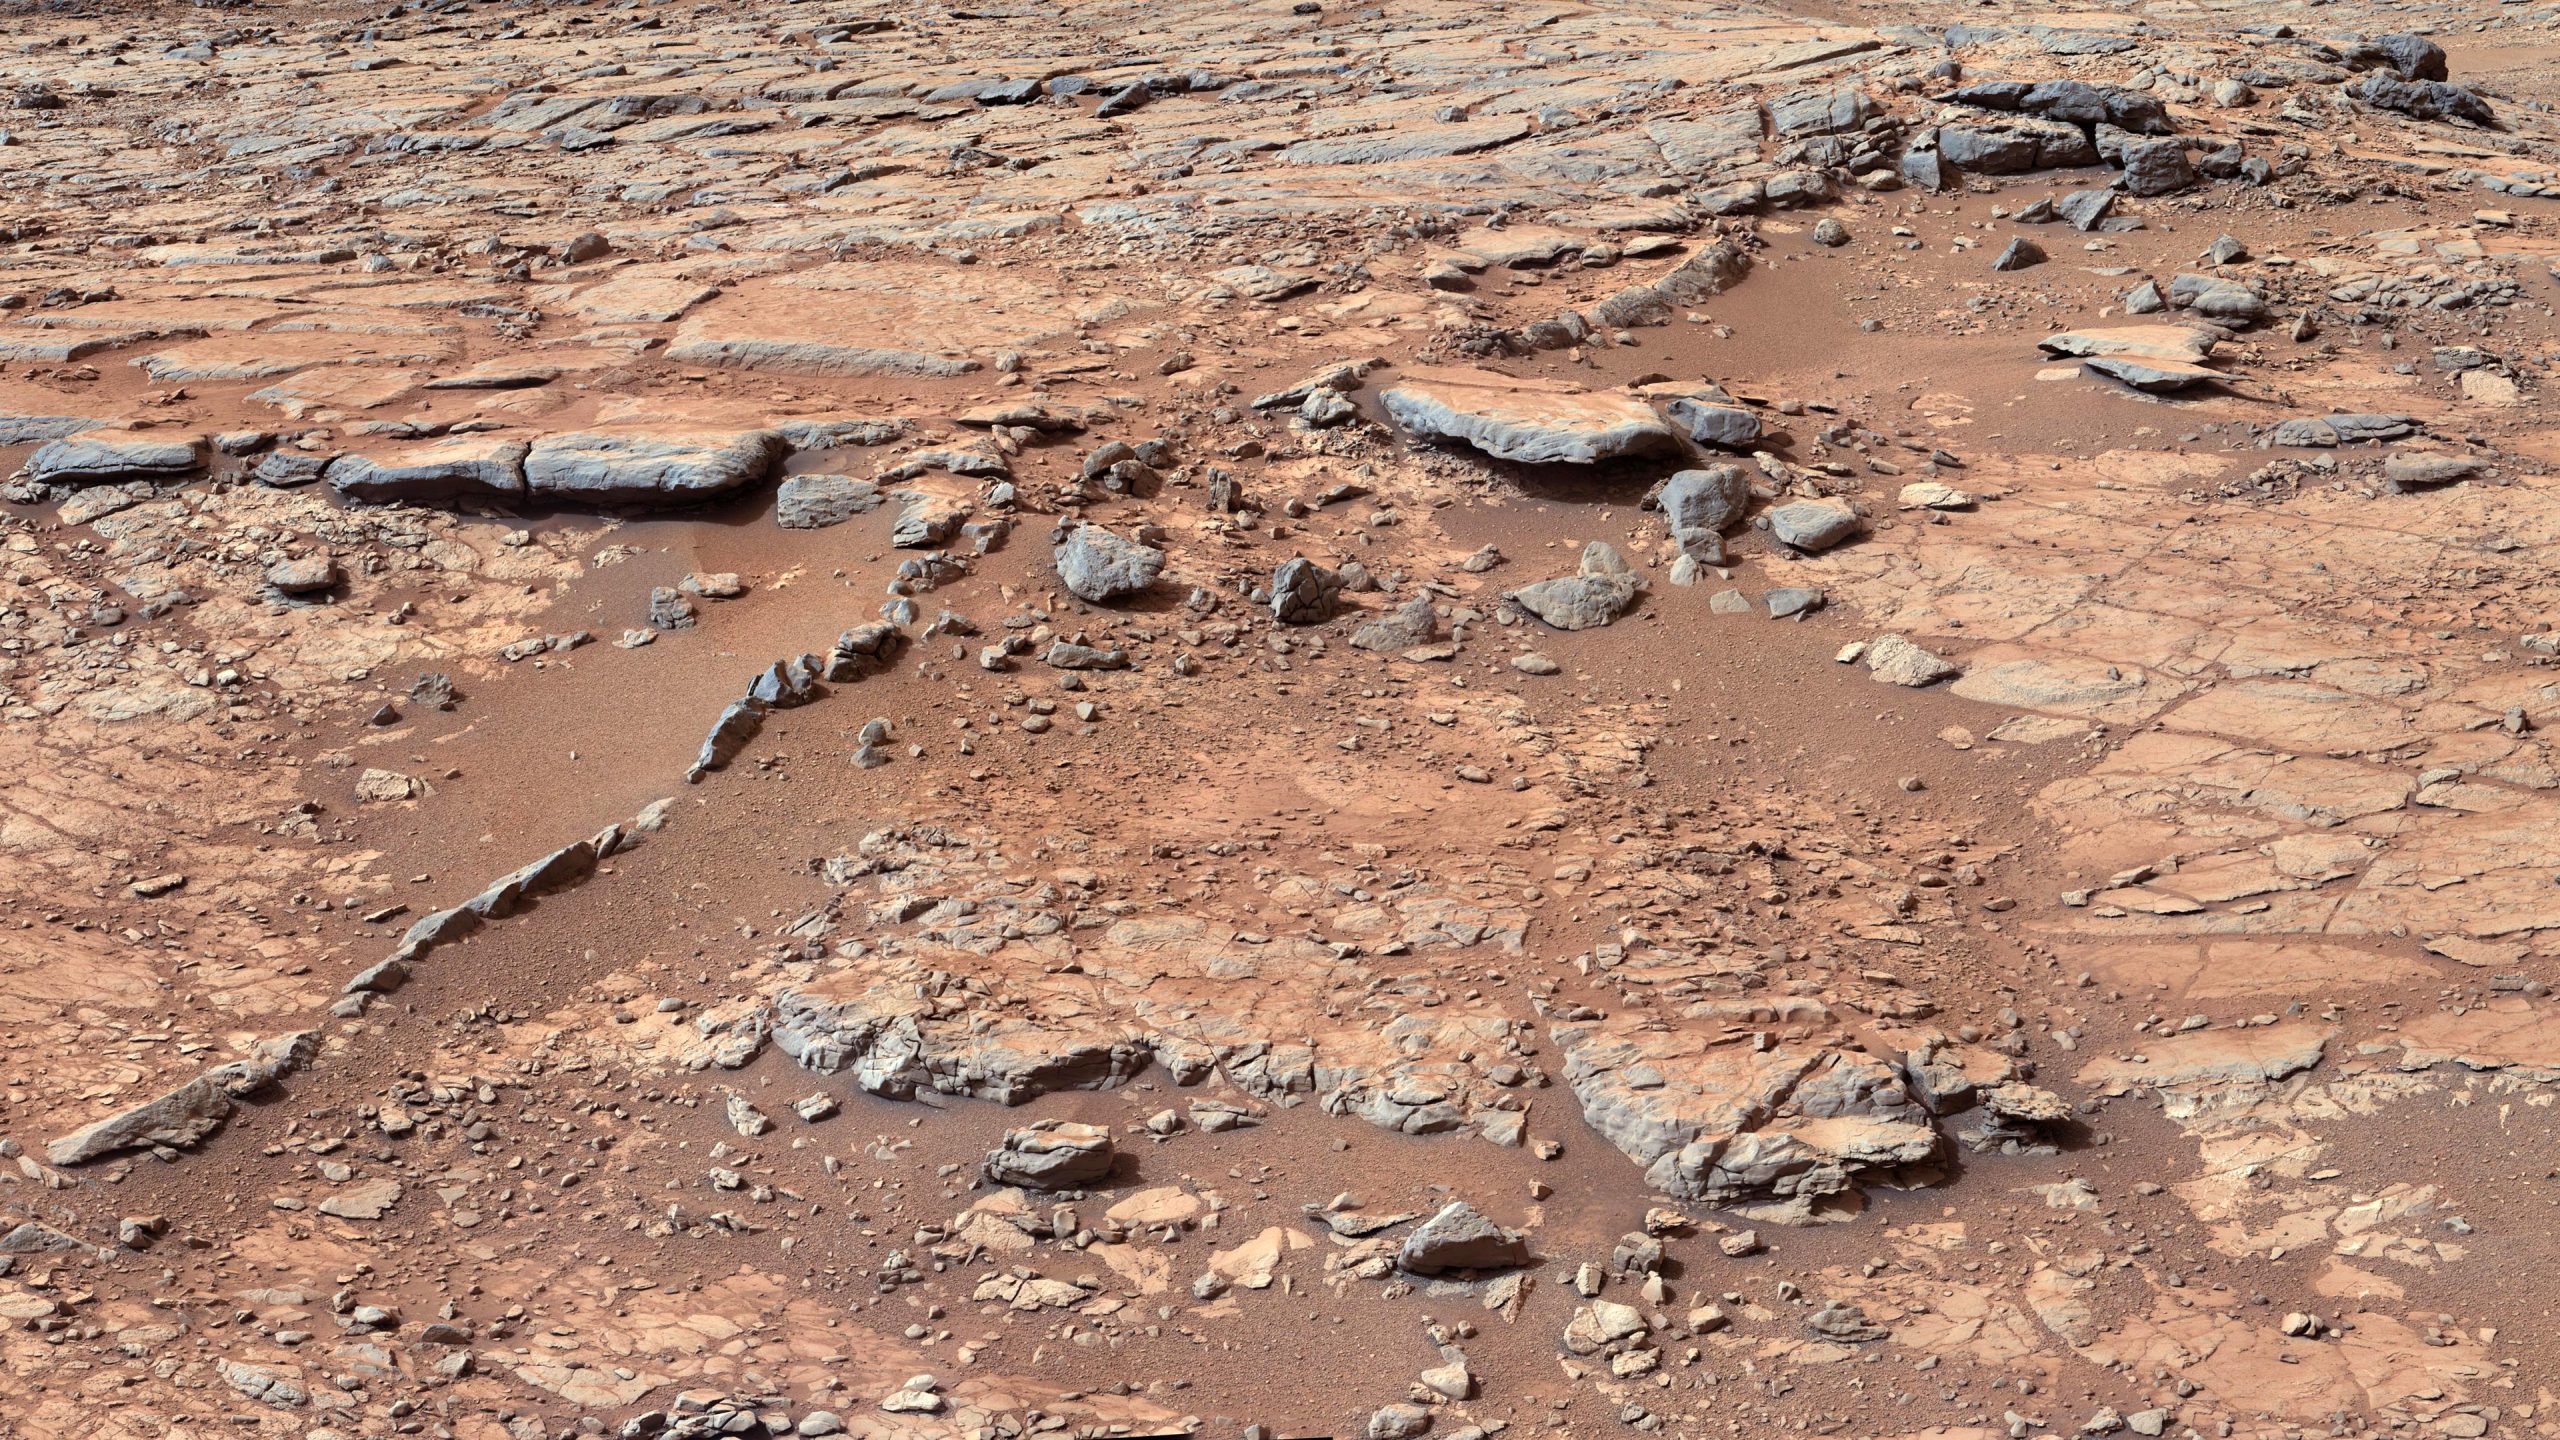 NASA's Curiosity Rover Measures Key Life Ingredient on Mars for First Time - SciTechDaily